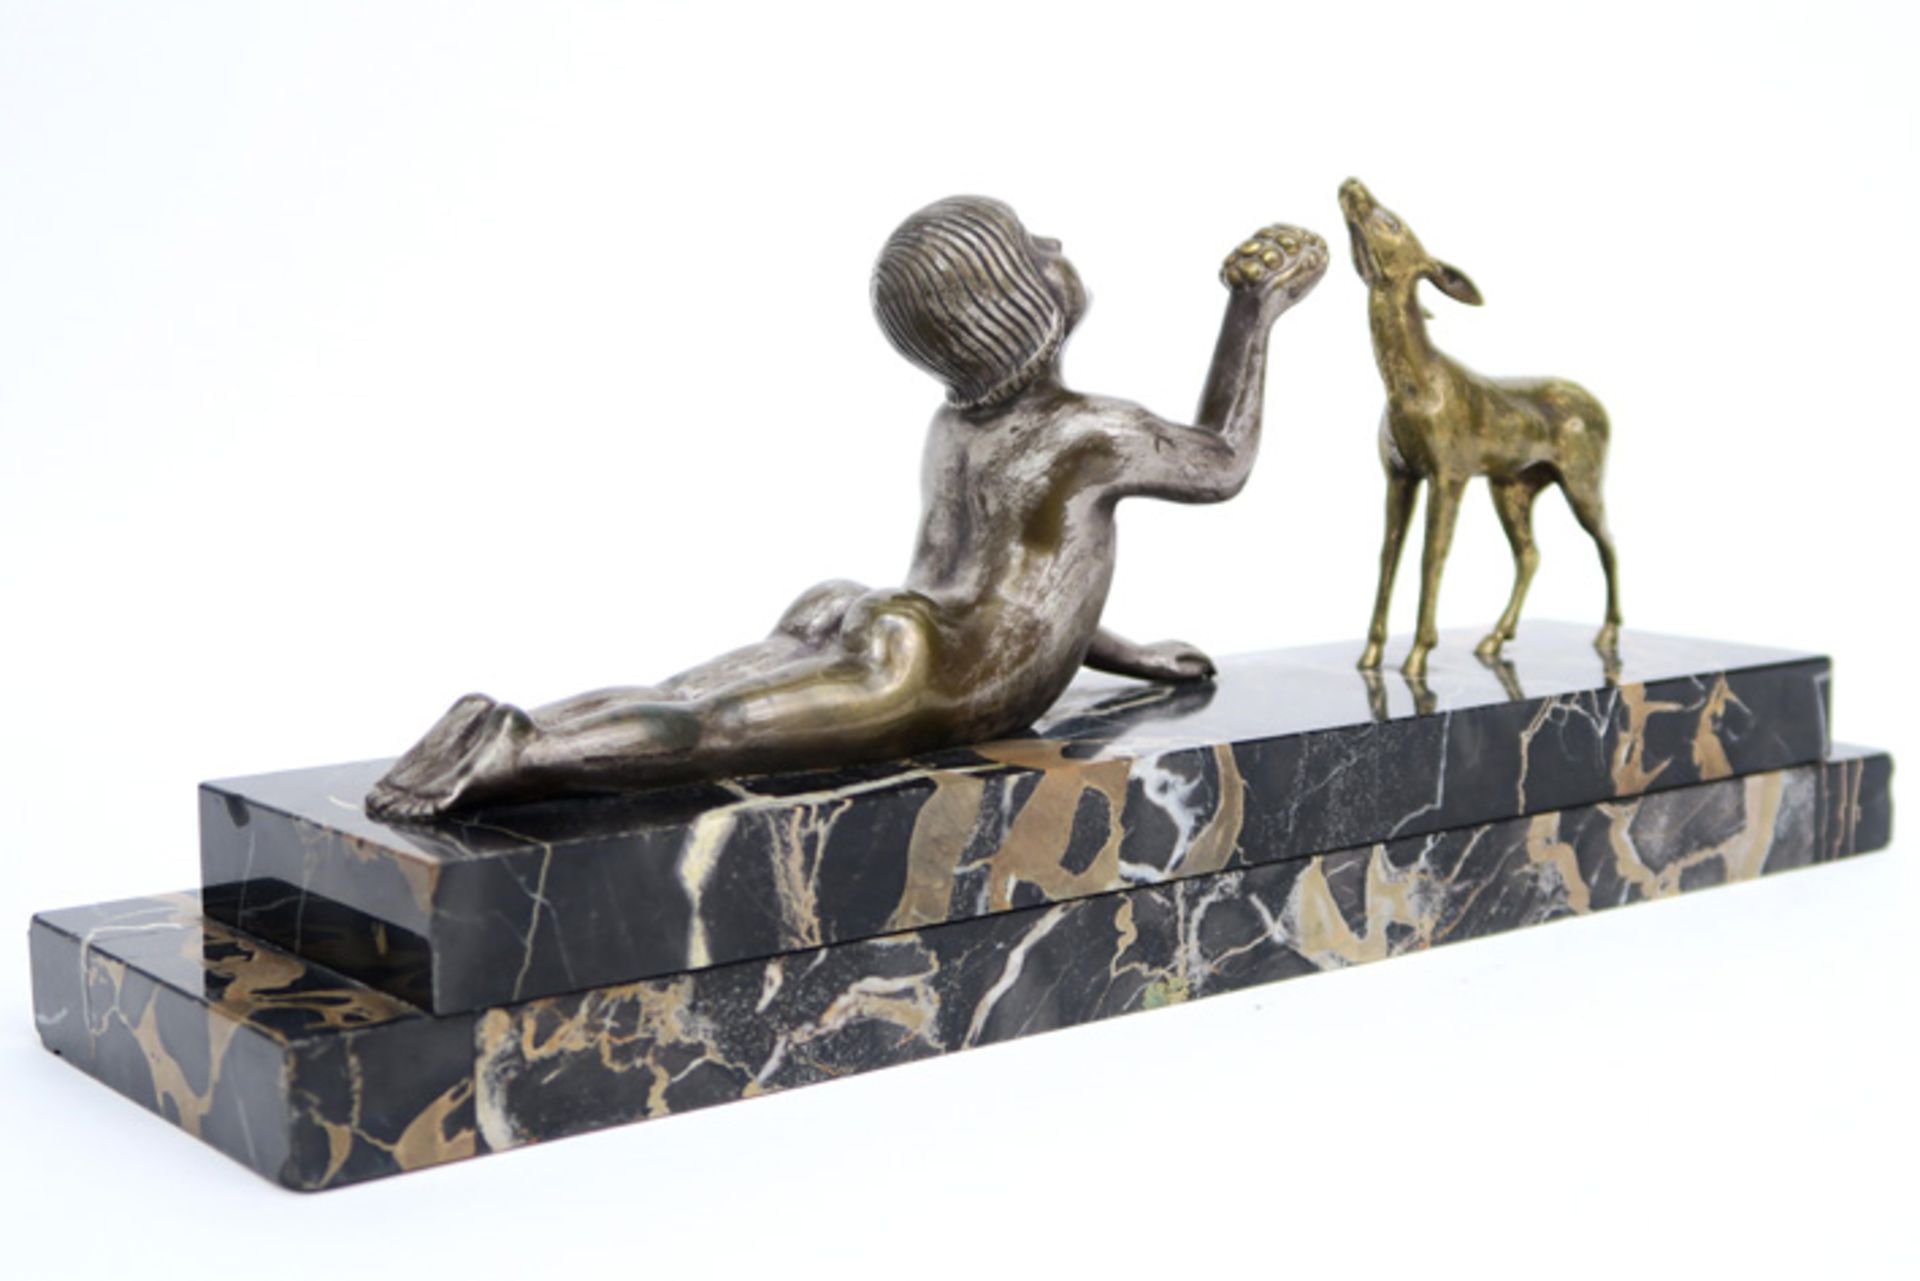 Zoltan Kovats signed double sculpture in bronze on a base in typical marble also with a "Editions - Bild 4 aus 5